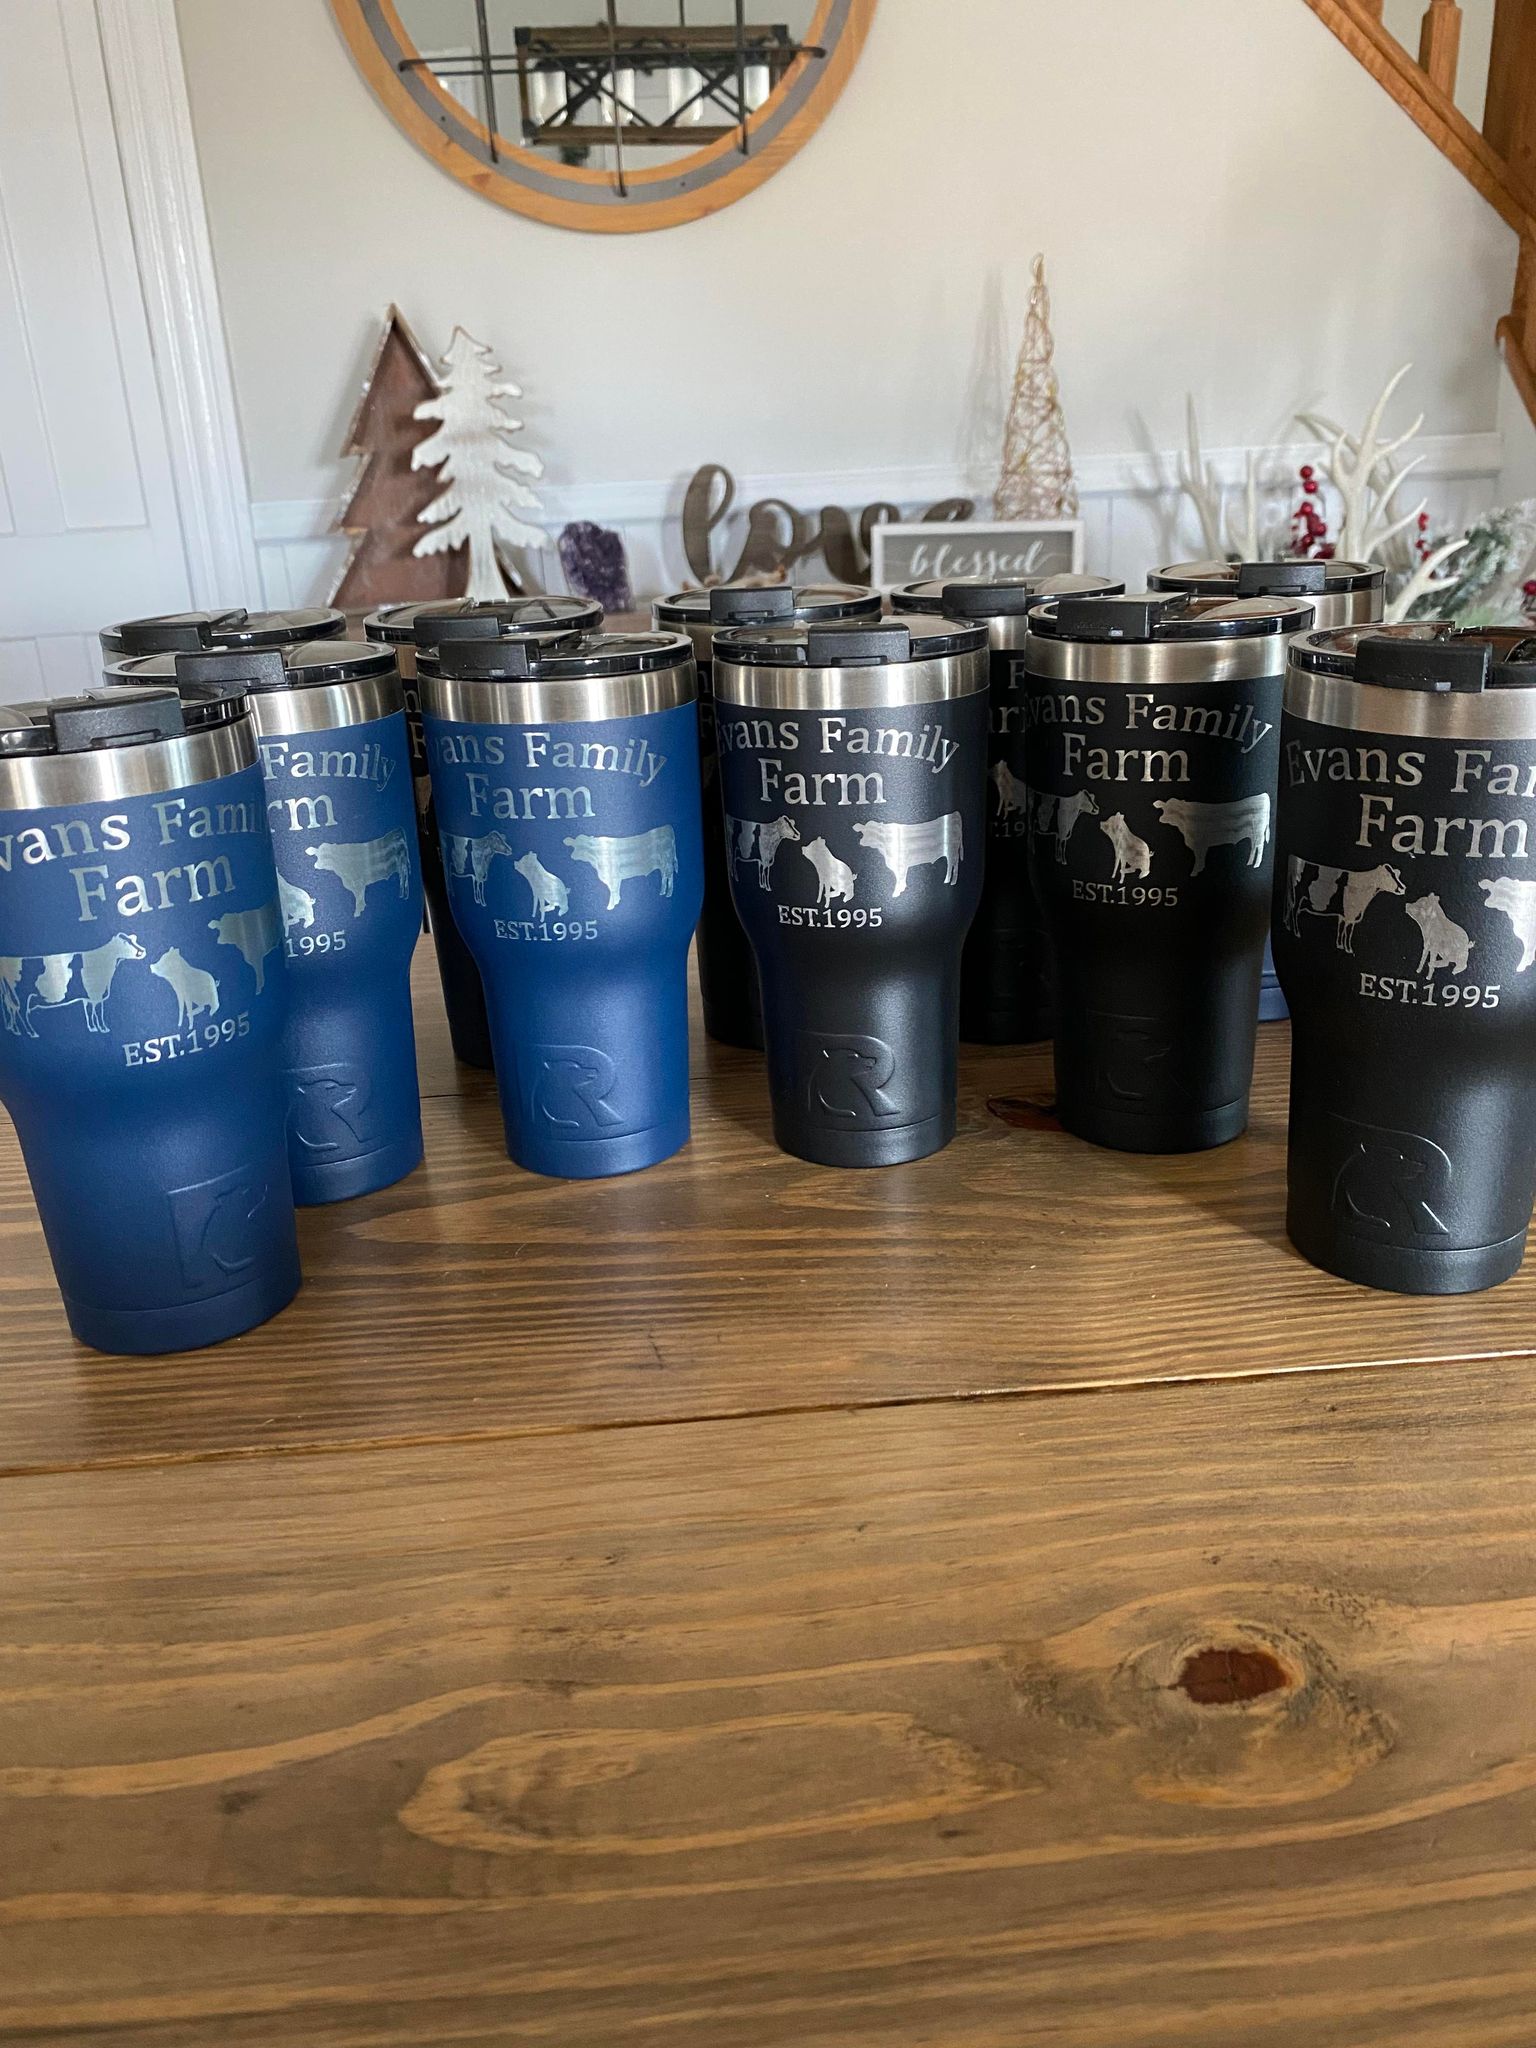 RTIC 20 oz. tumbler - engraved with your logo — Marty's Bag Works